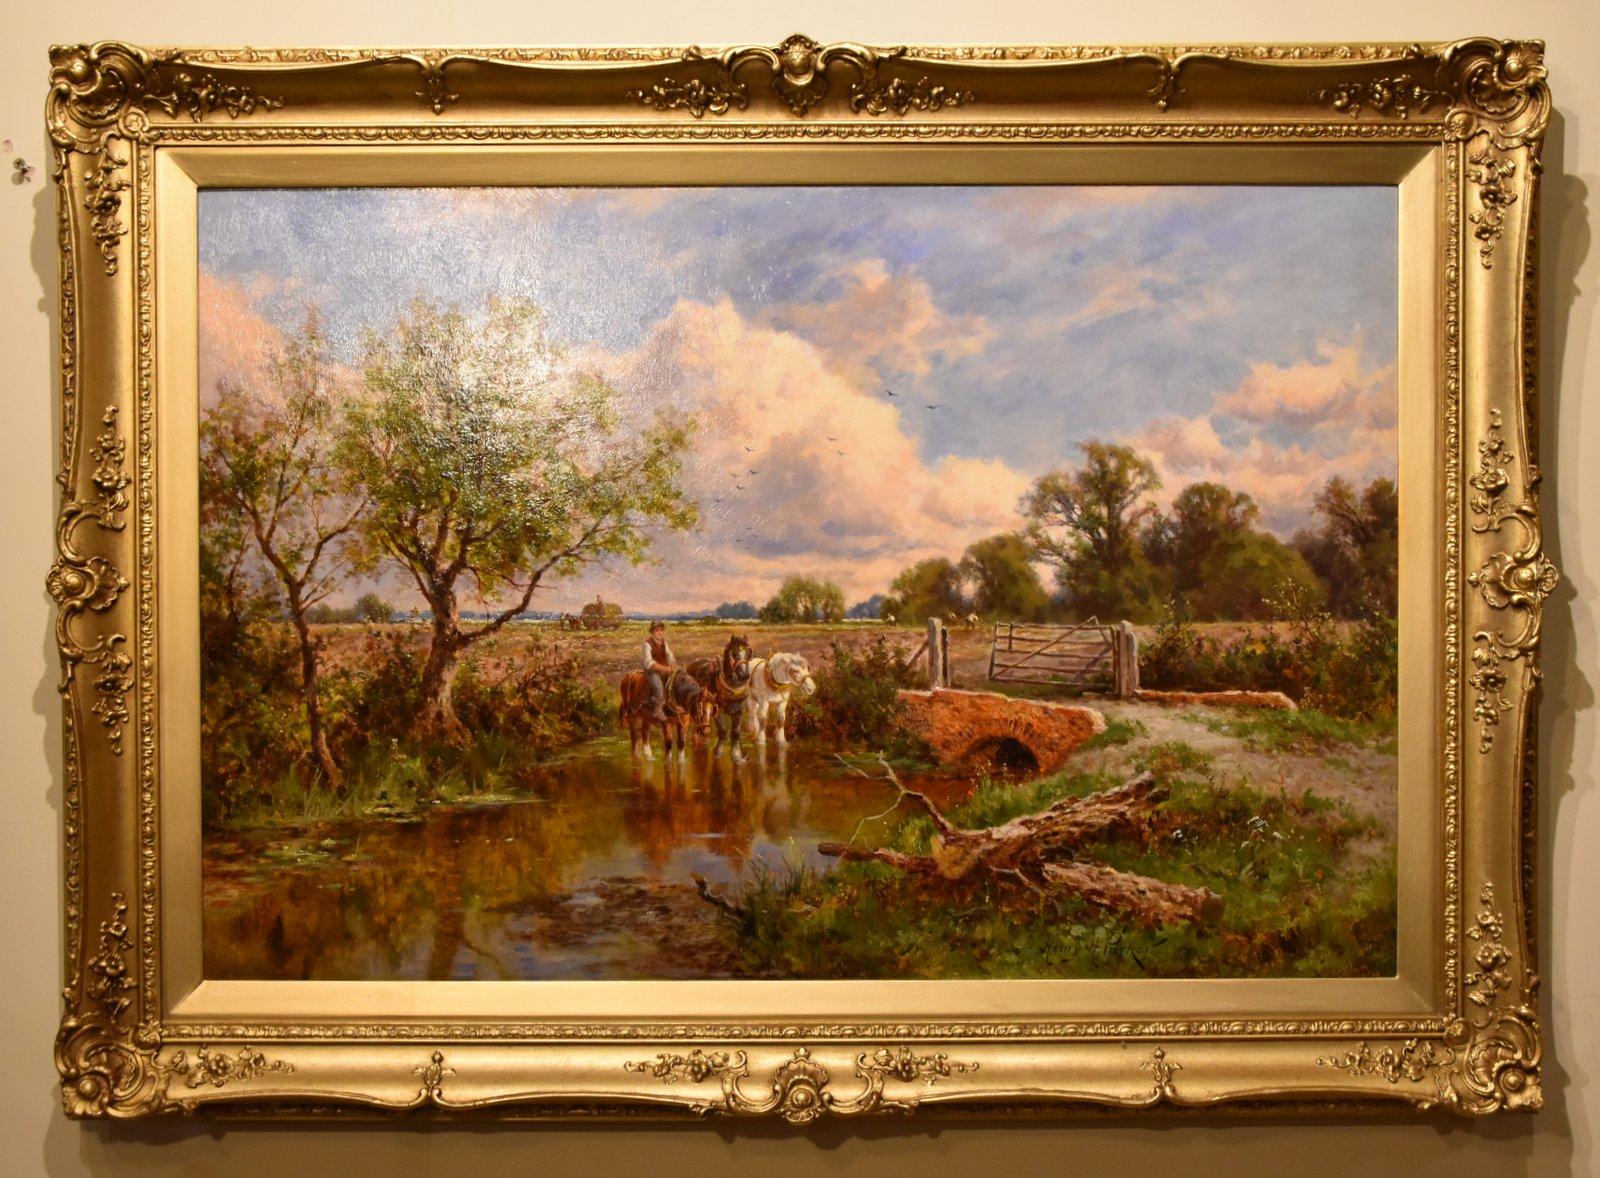 Peinture à l'huile de Henry Hiller Parker  "Watering the Horses" flourished 1858- 1930 Home counties painter of tranquil rural landscapes studied at St. Martin School of Art and Royal Acsdemy schoolsExhibited in Canada and the states and worked for